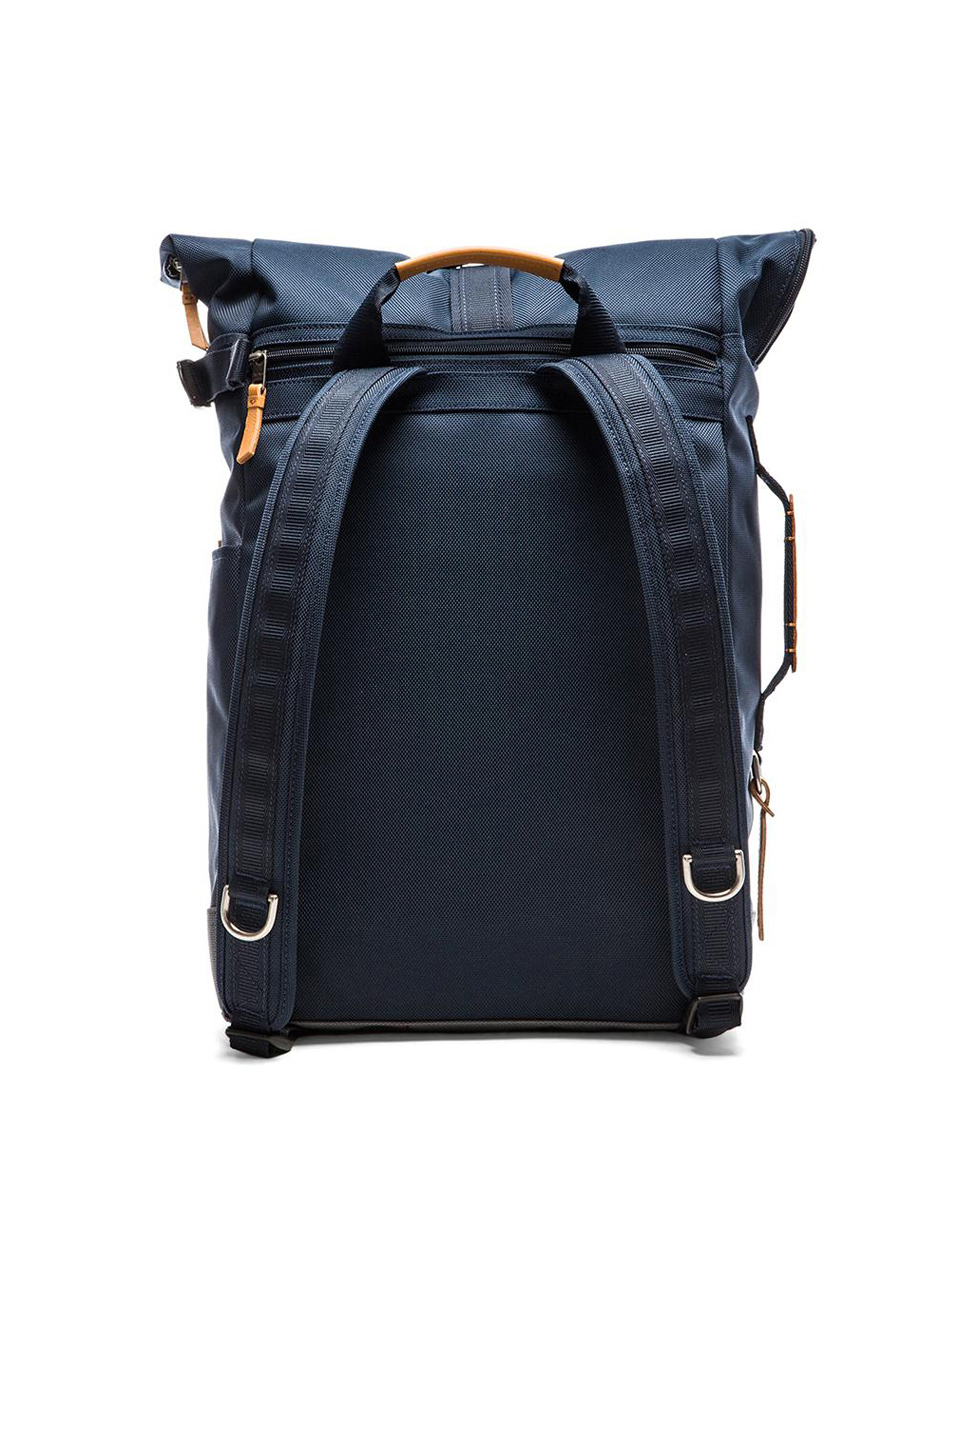 Tumi Dalston Ridley Roll Top Backpack in Navy (Blue) for Men - Lyst